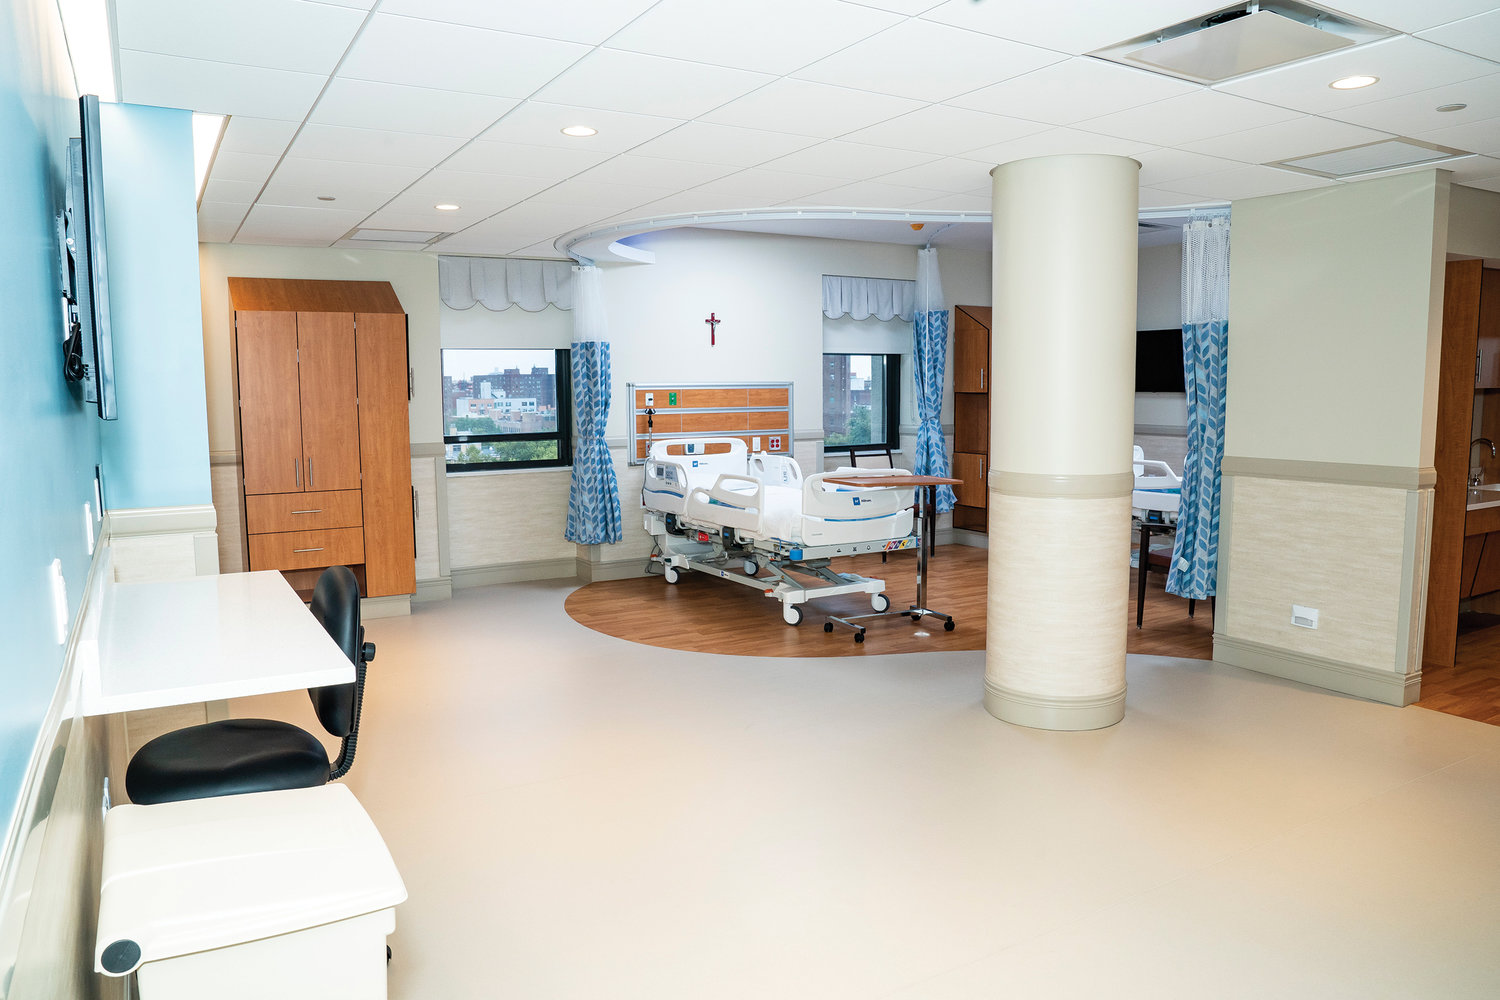 A crucifix graces the wall above a technology-enabled bed in a spacious room at the newly renovated hospital.